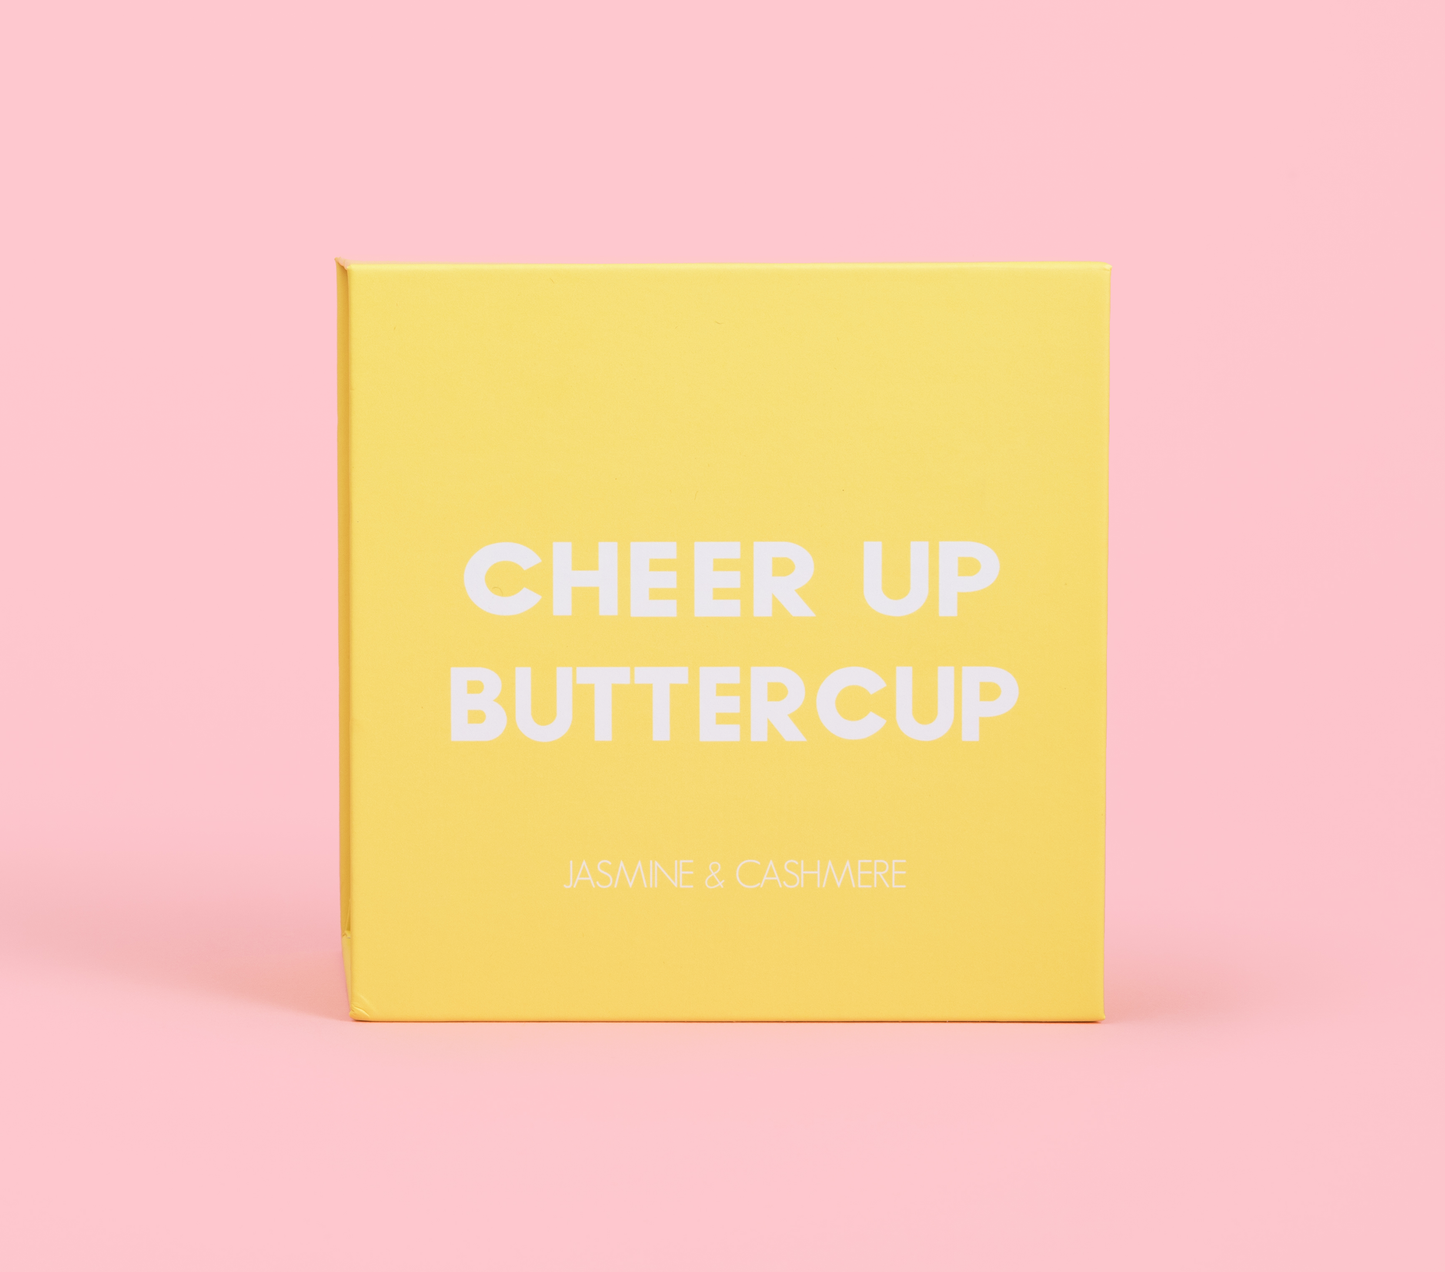 yellow candle gift box that says Cheer Up Buttercup placed on pink background